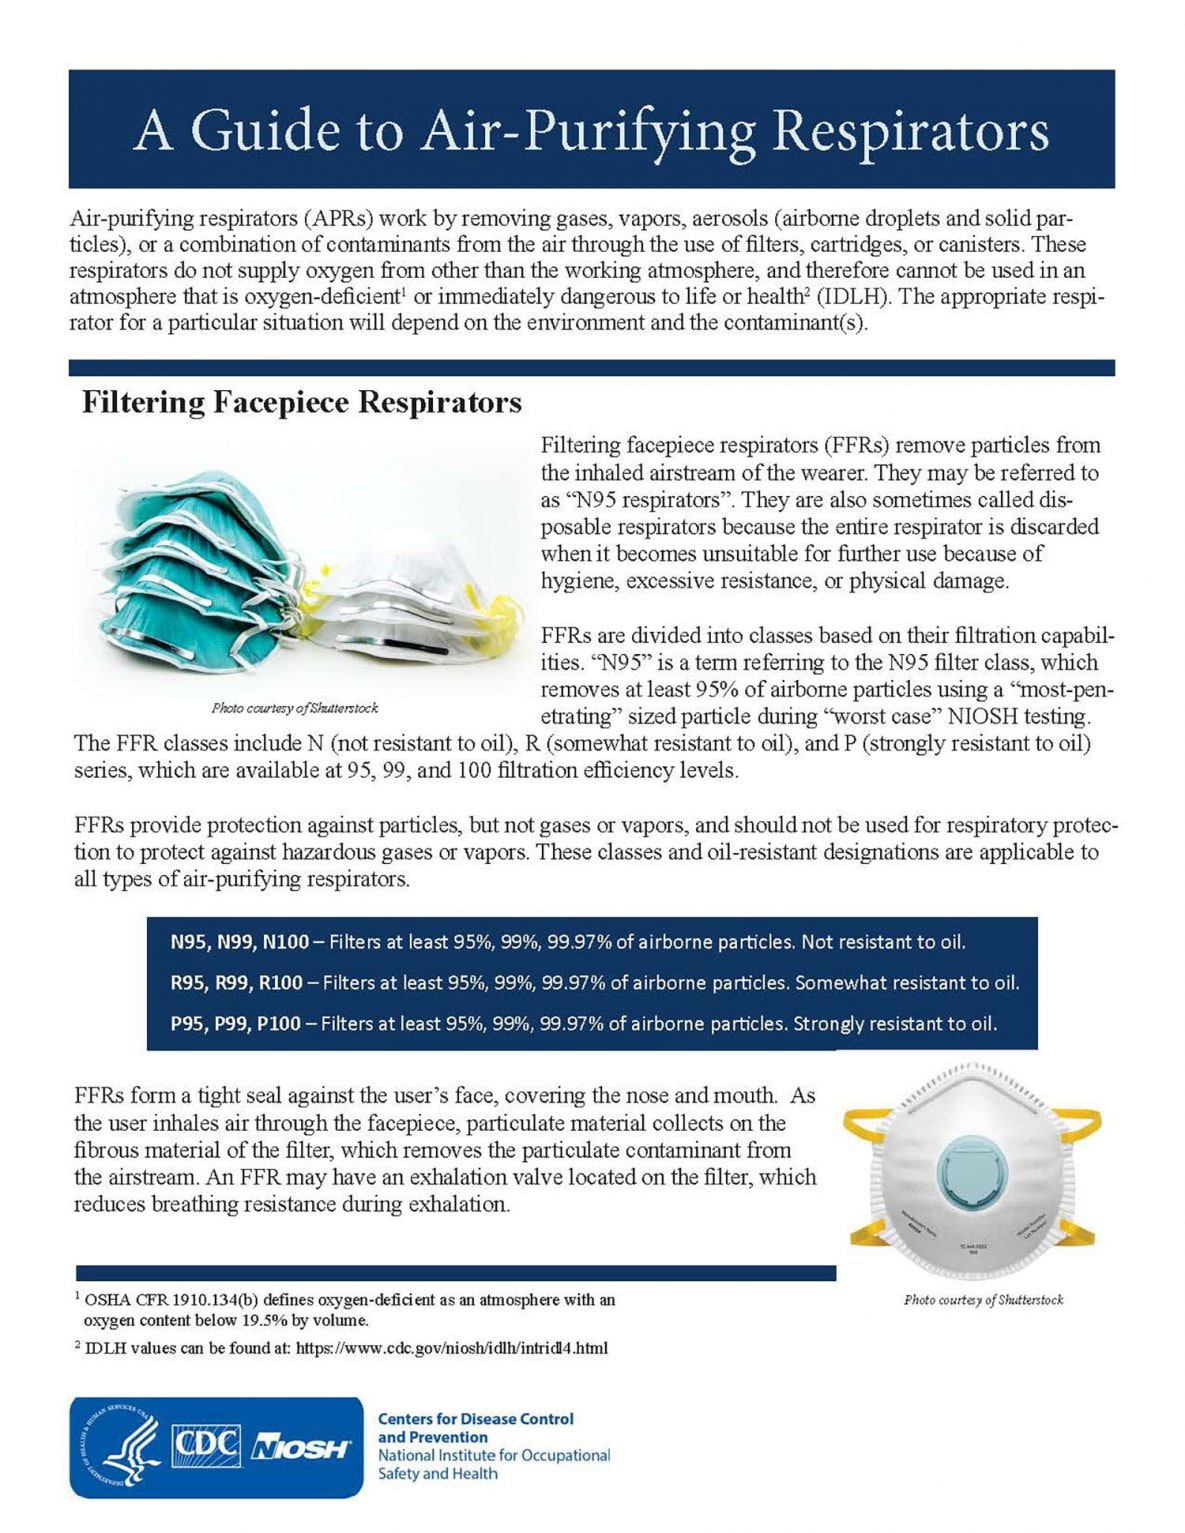 A Guide to Air-Purifying Respirators - cover page publication 2018-176